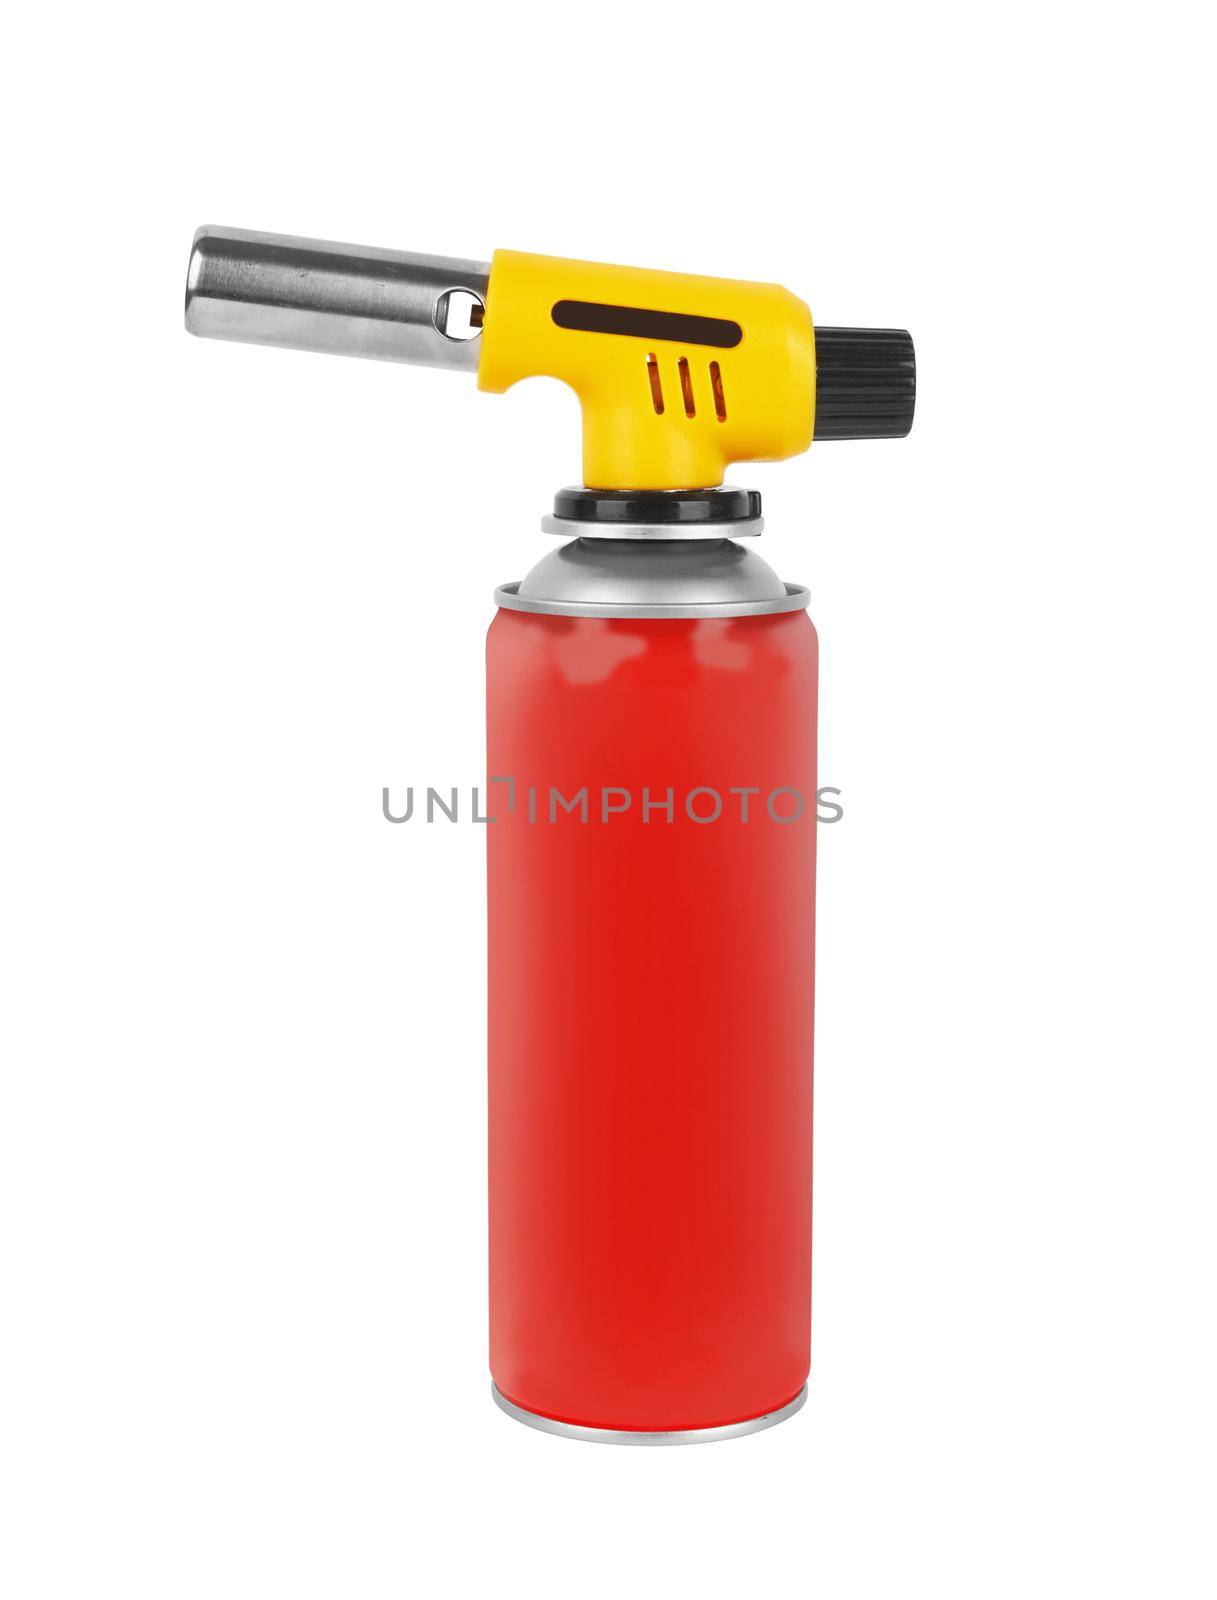 Gas can with manual torch burner  by pioneer111